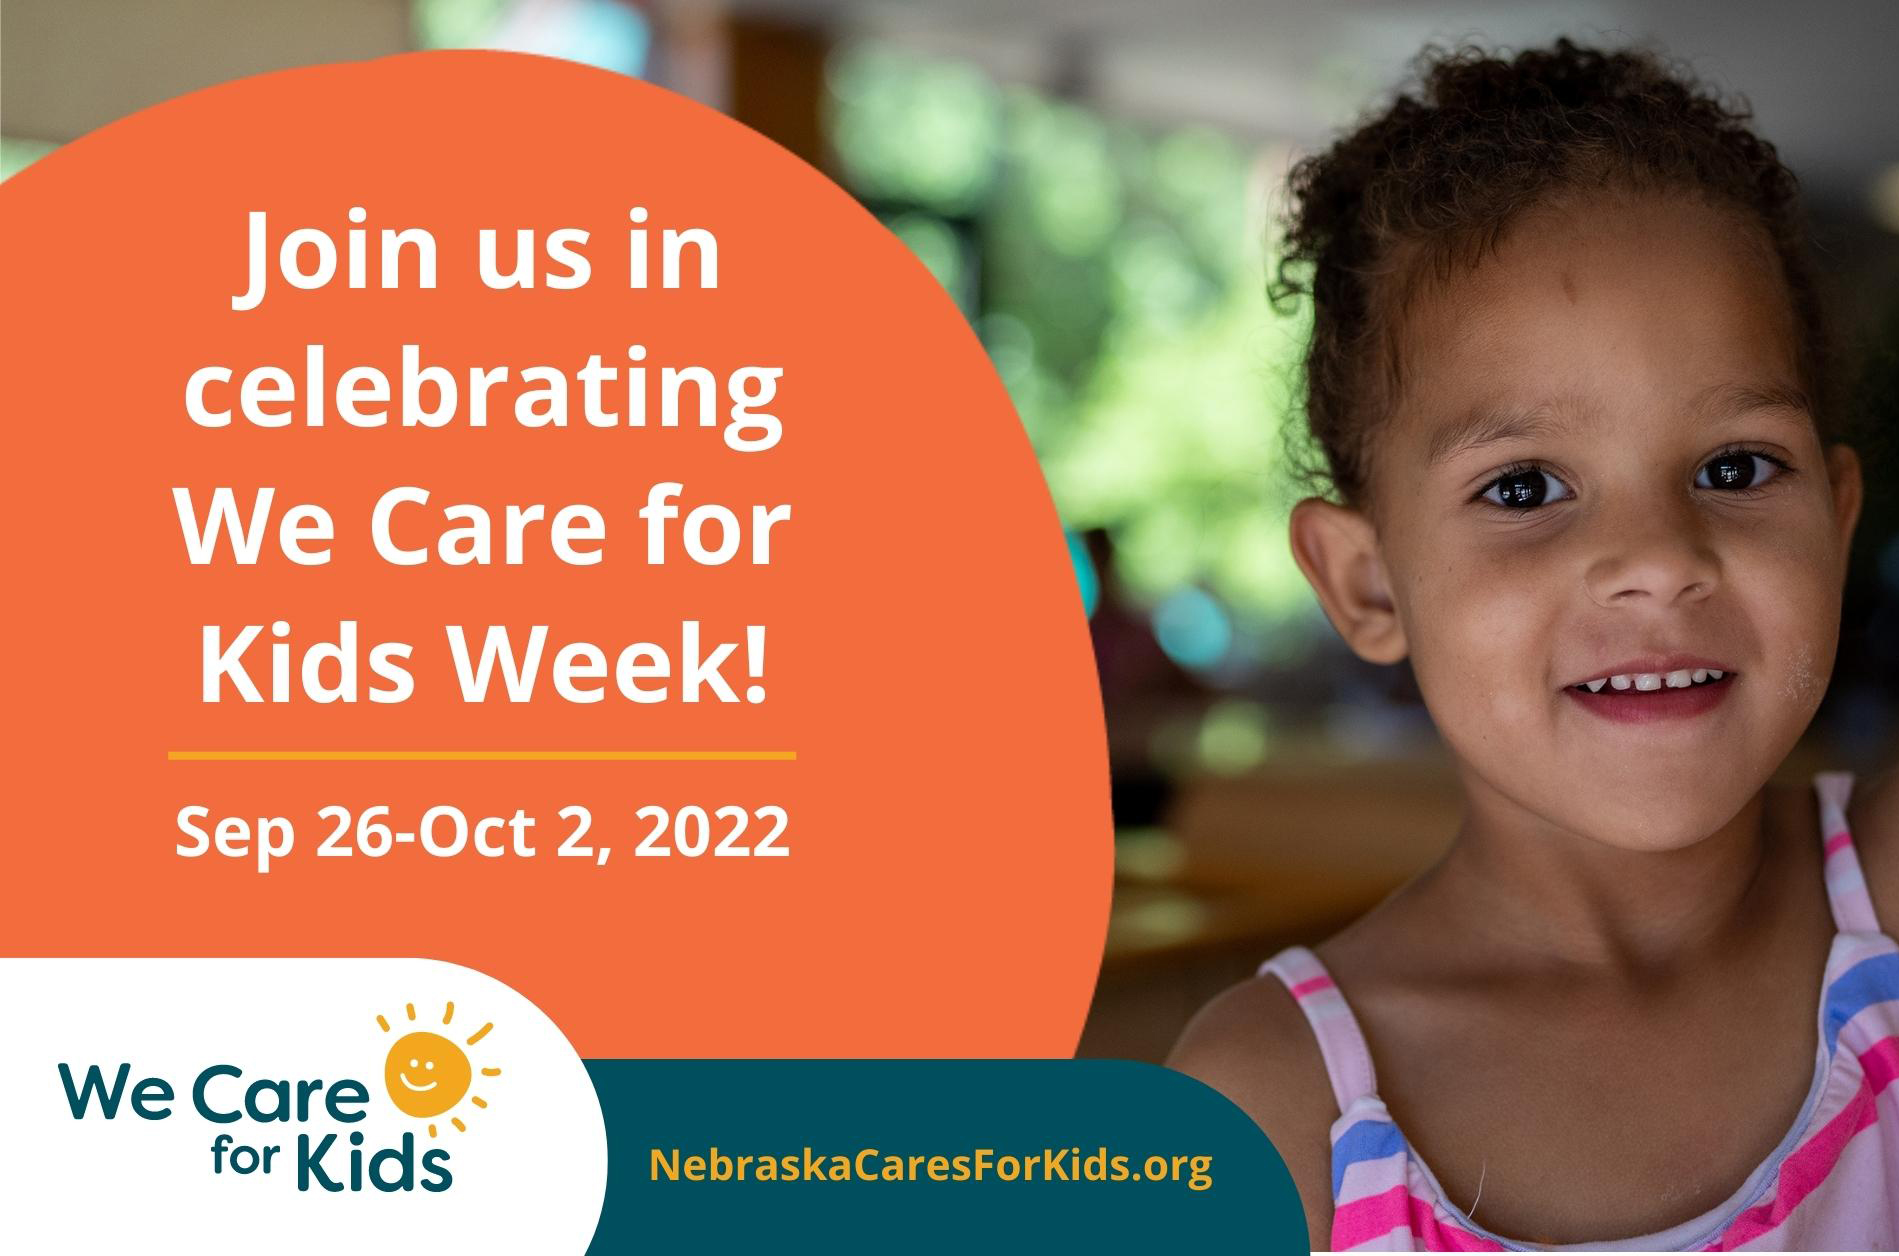 We Care for Kids Week